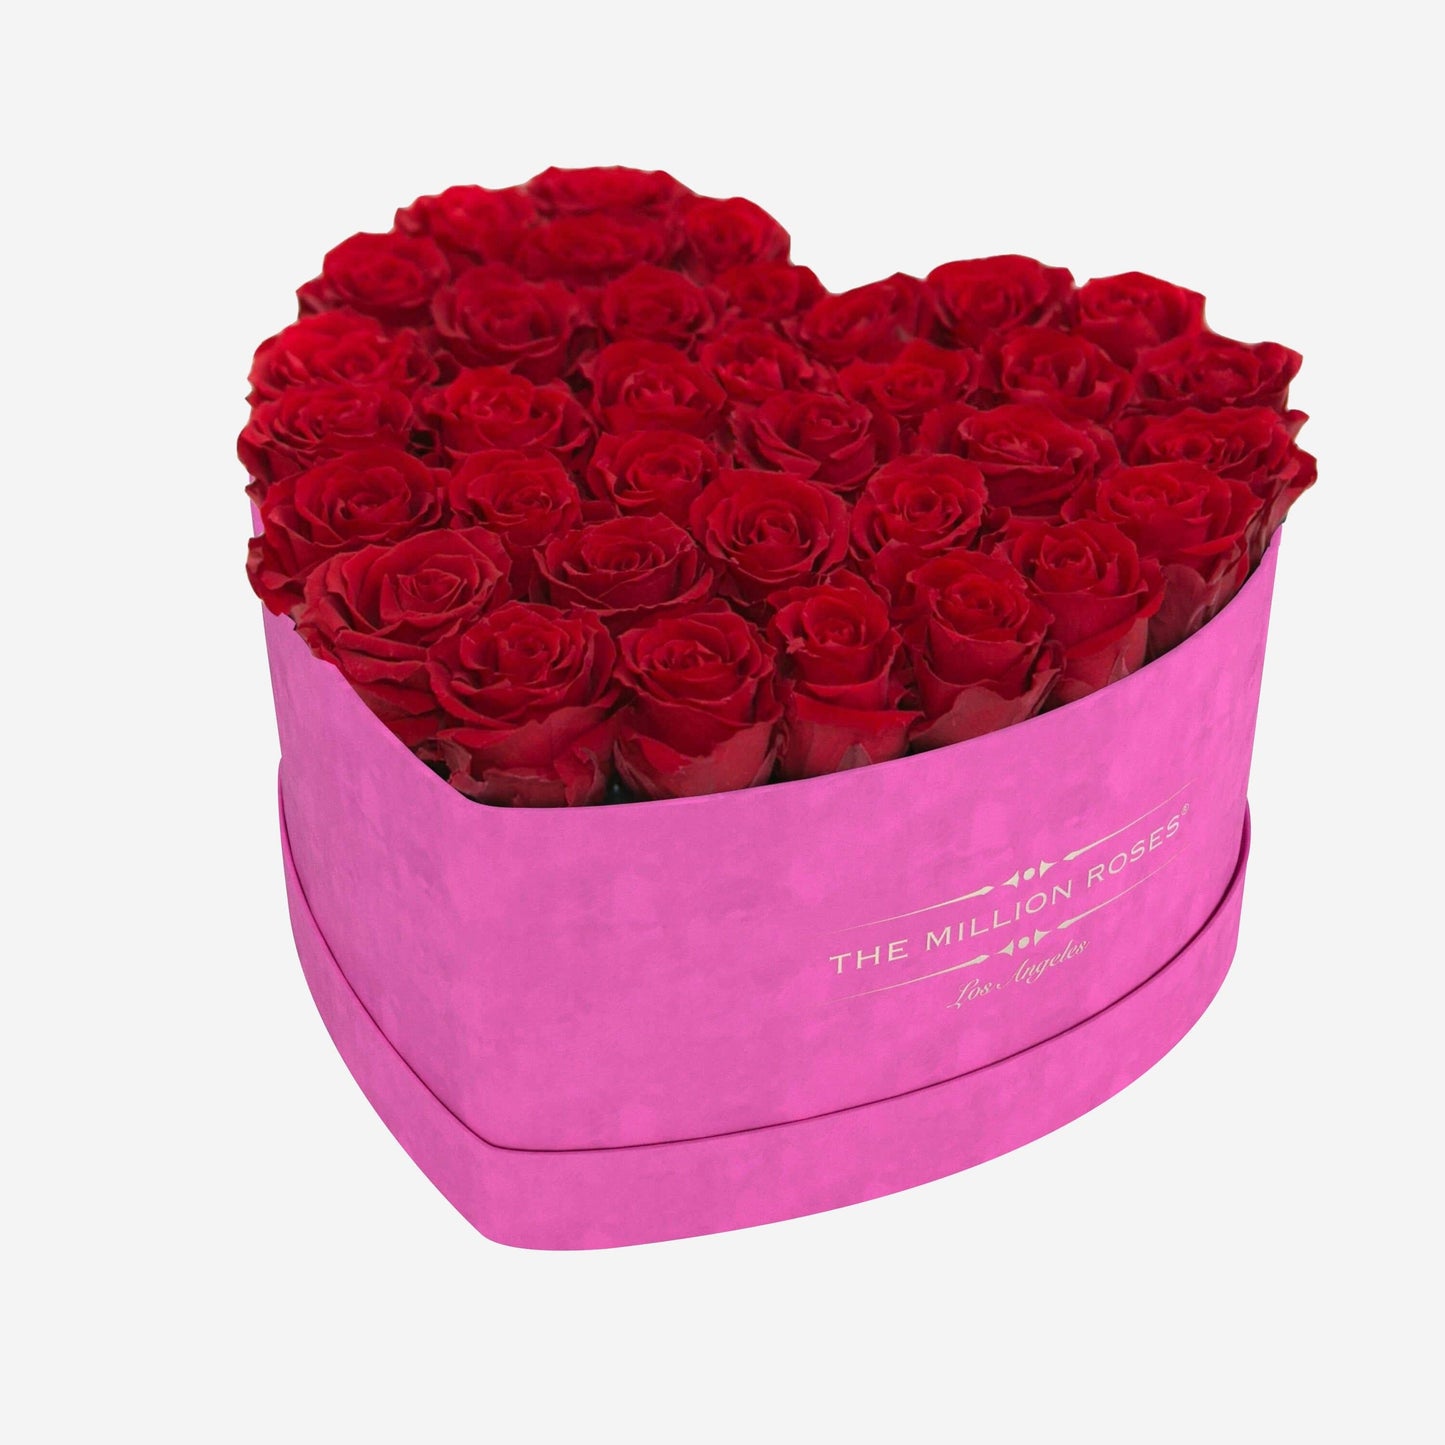 Heart Hot Pink Suede Box | Red Roses - The Million Roses